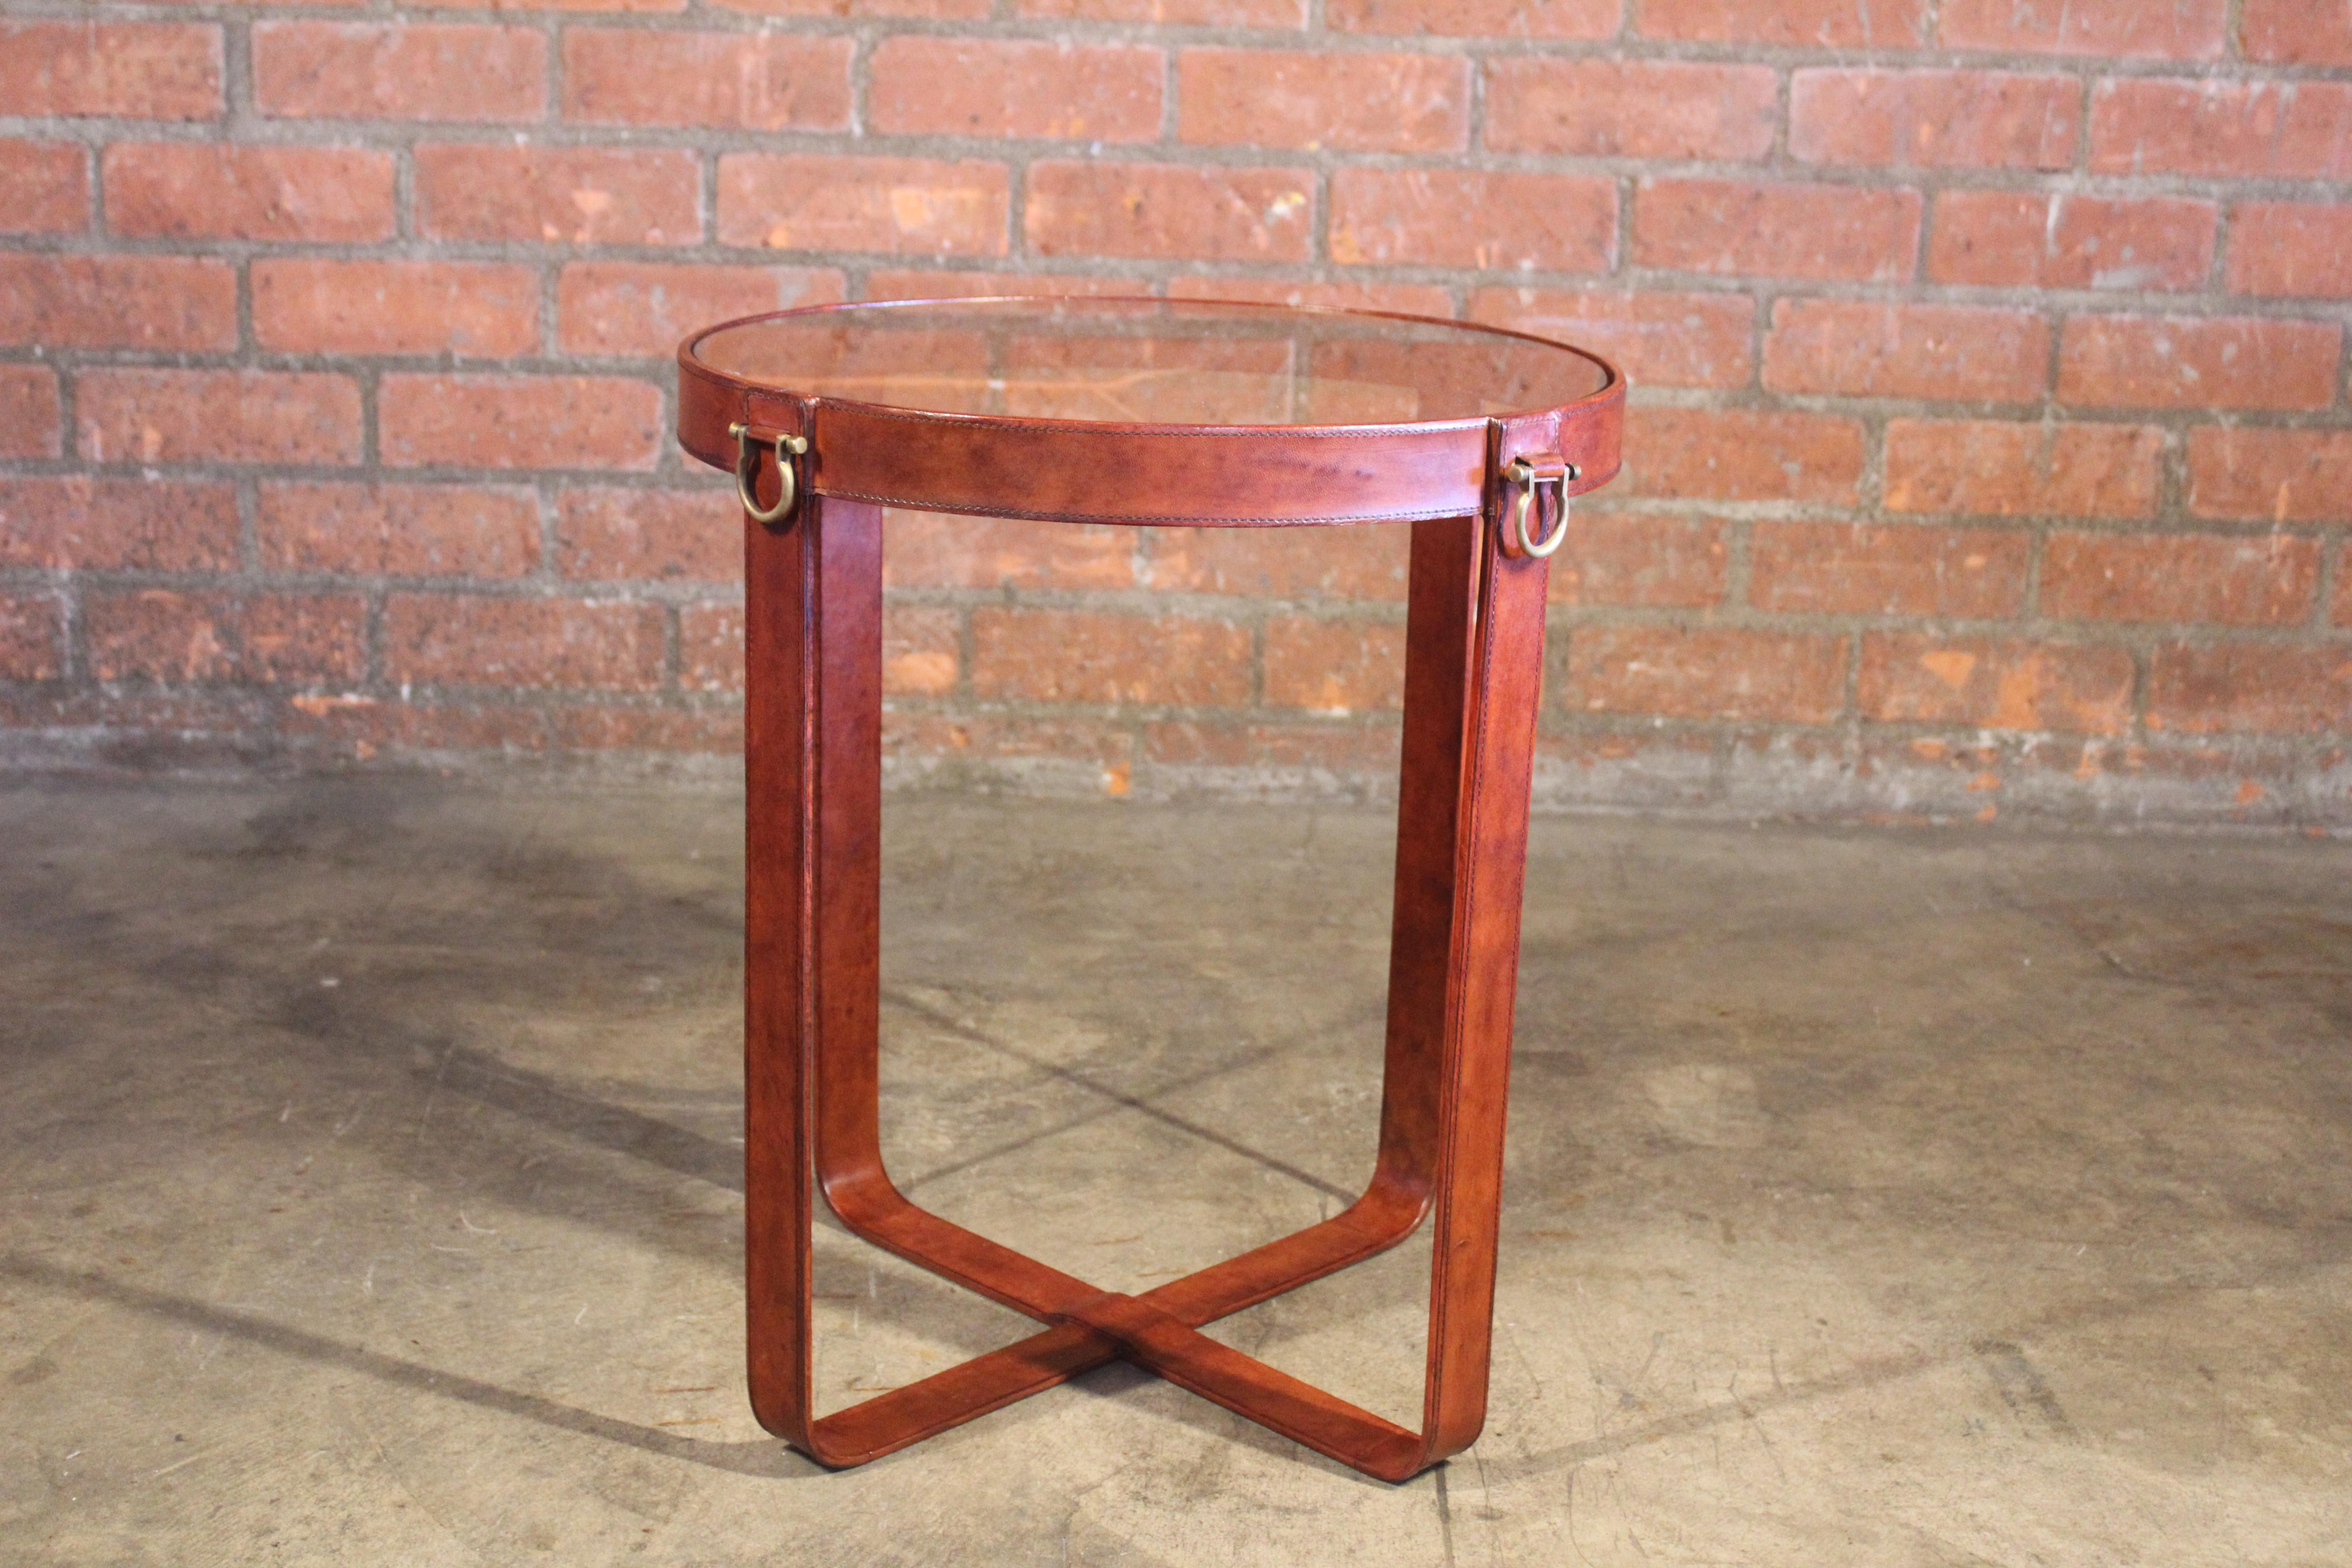 A leather wrapped side table with a reflective glass surface and brass hook details. In good condition. In the style of Jacques Adnet.